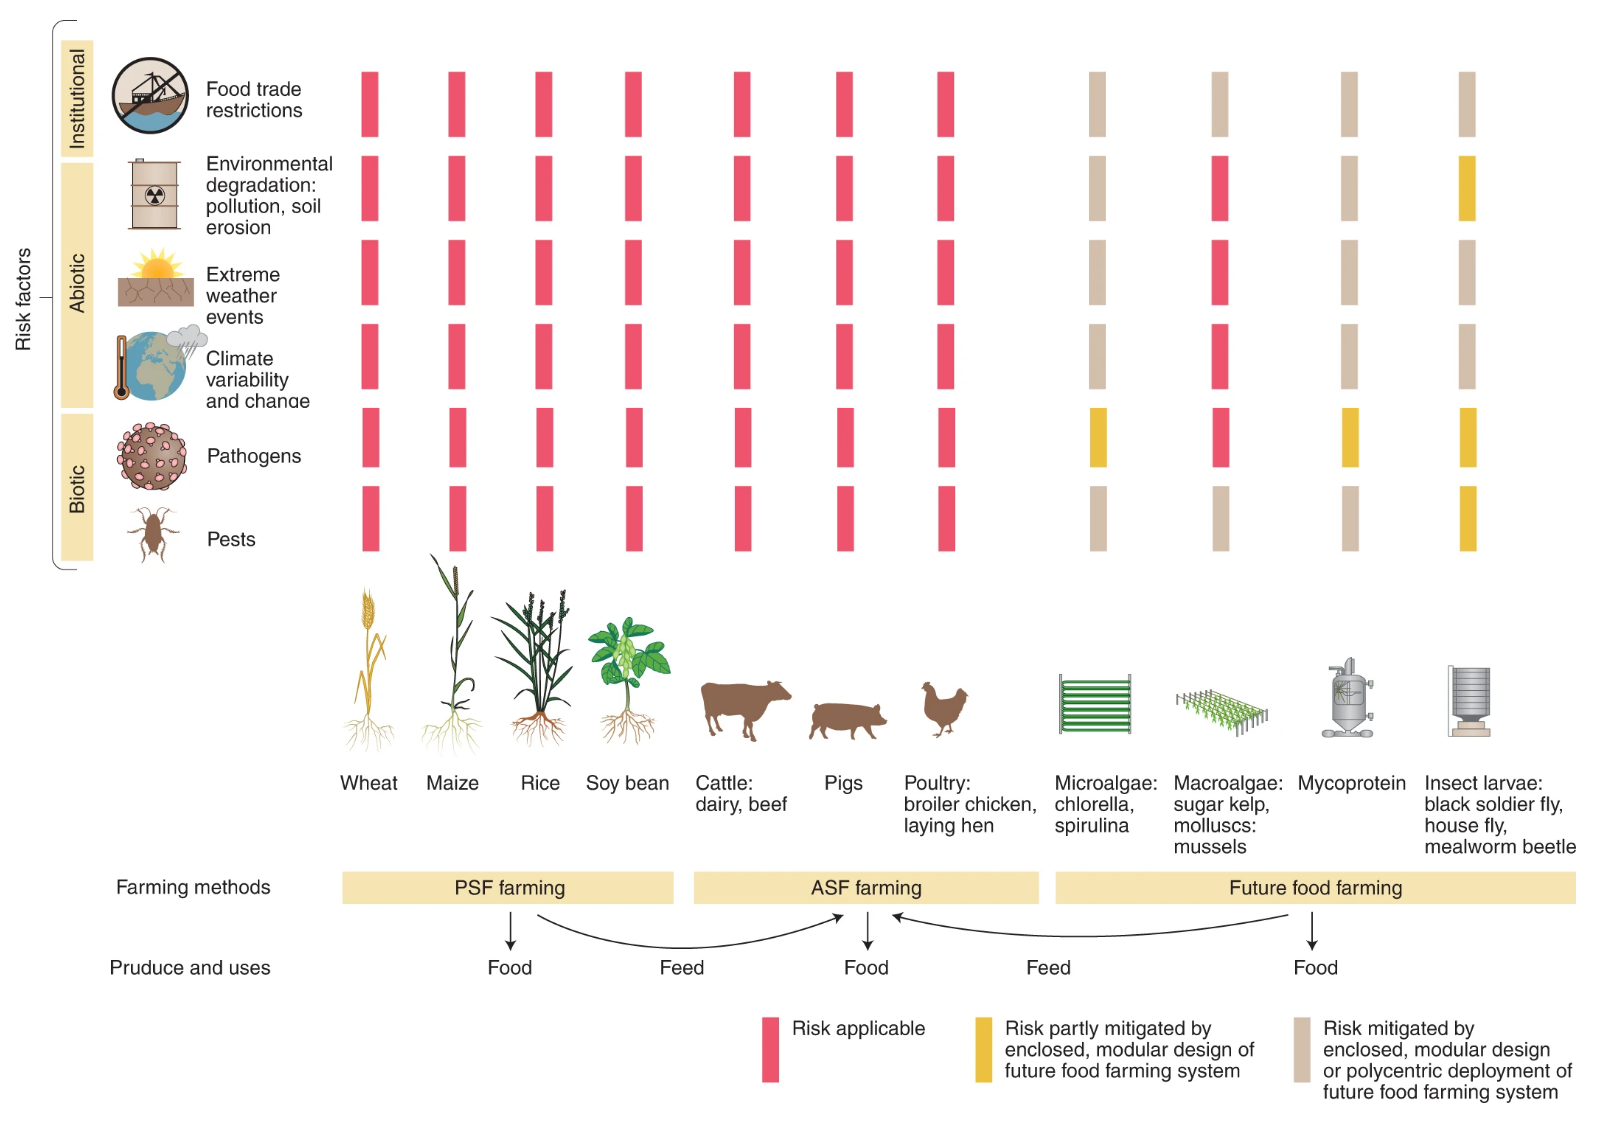 Current risk landscape of ASF PSF and future foods farming systems